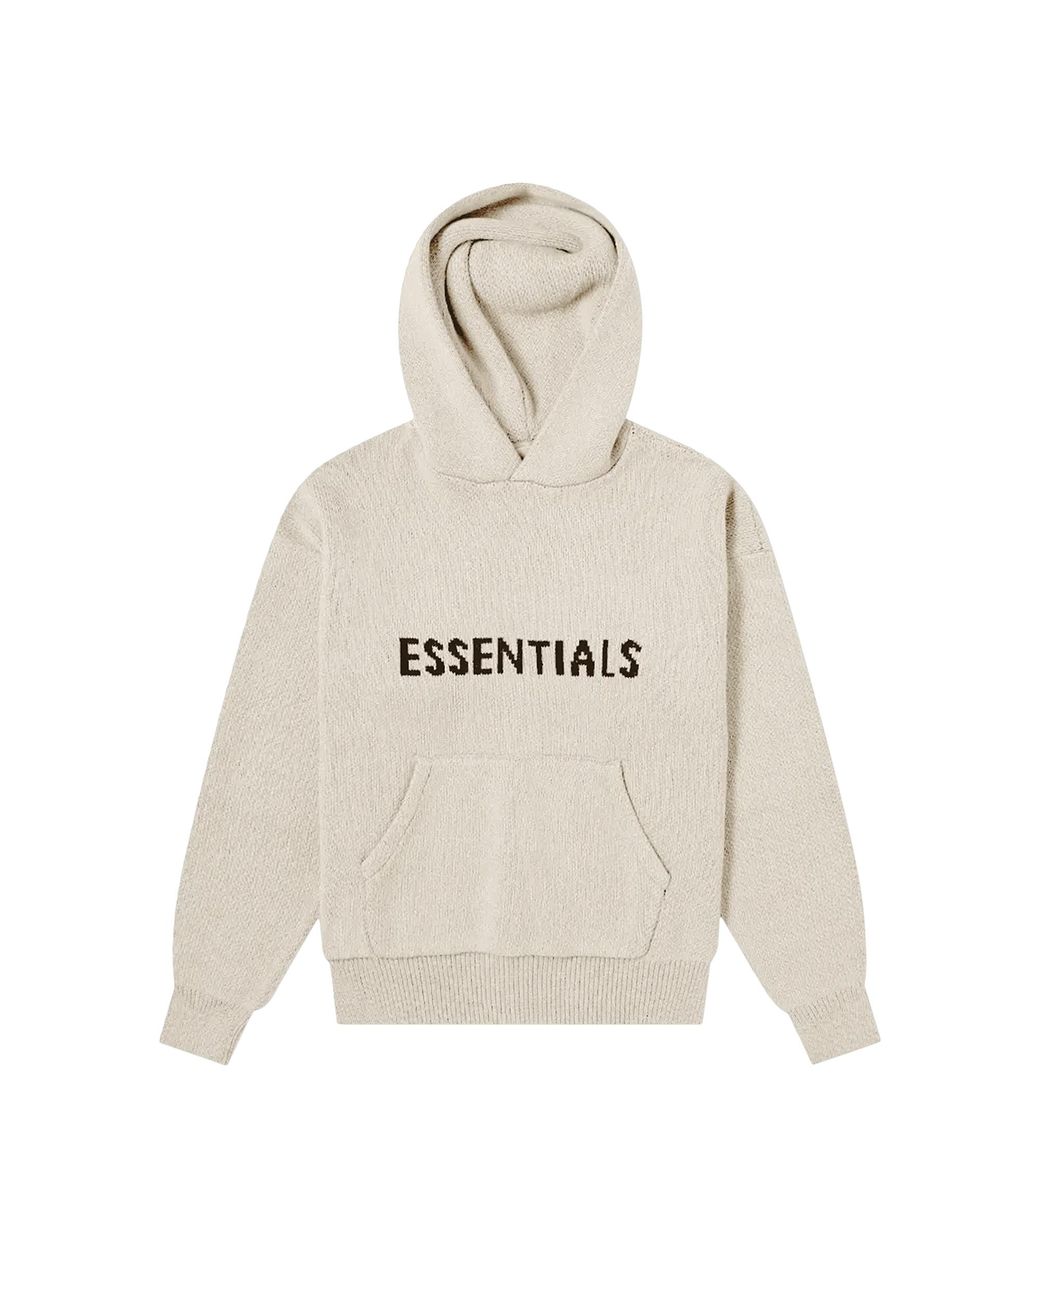 Fear of God ESSENTIALS Knit Hoodie 'moss' in White for Men | Lyst